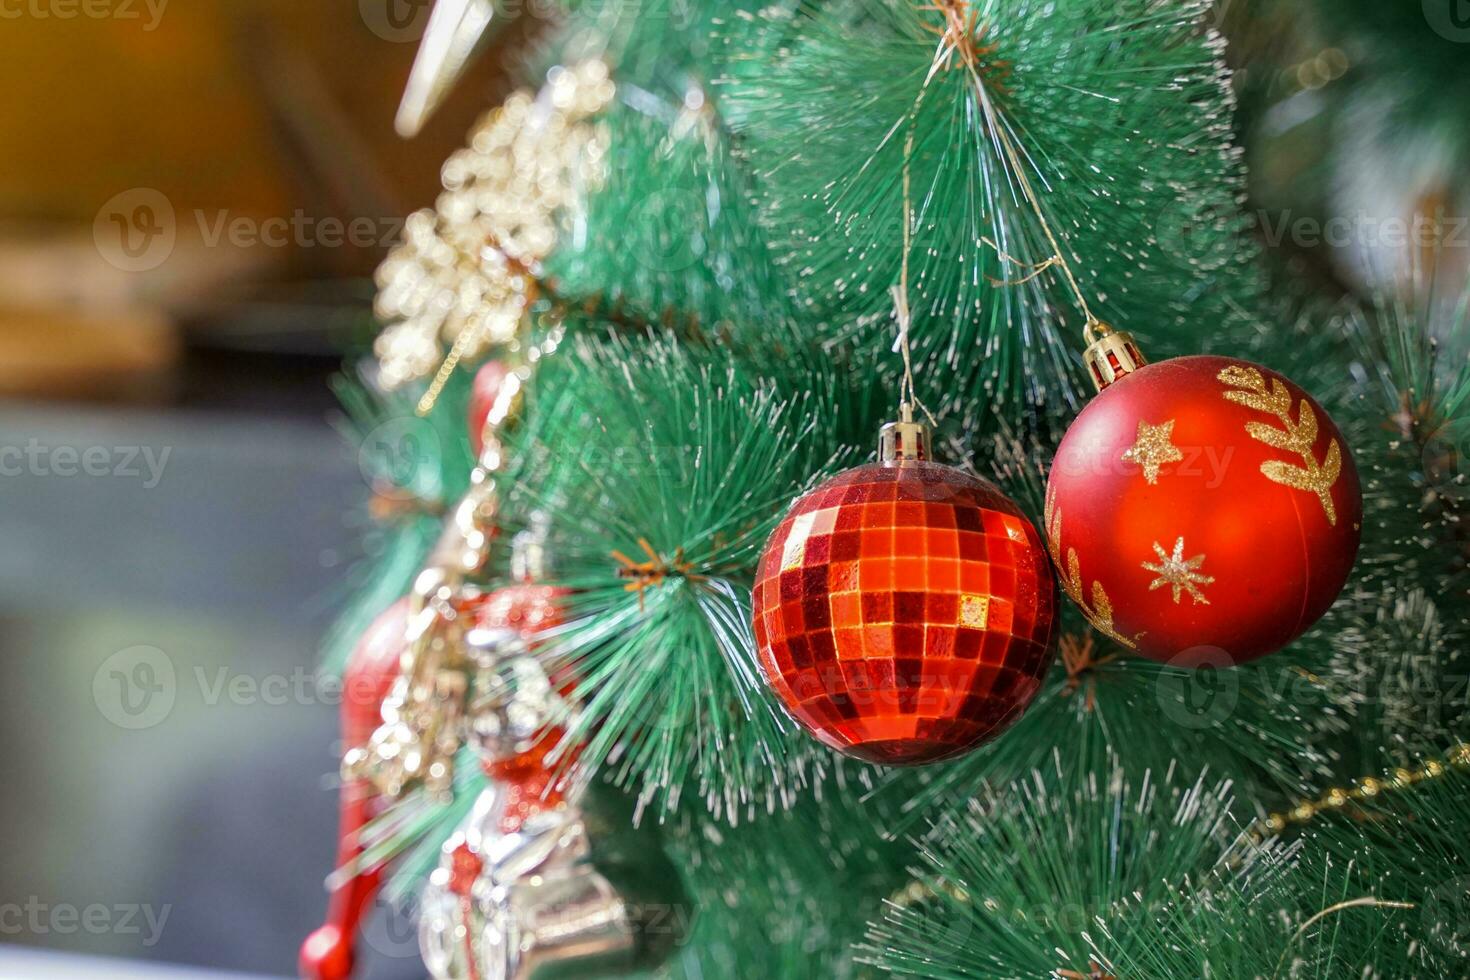 red decorated balls for decoration on the Christmas tree to prepare for the celebration of the Christmas season every year. soft and selective focus. photo